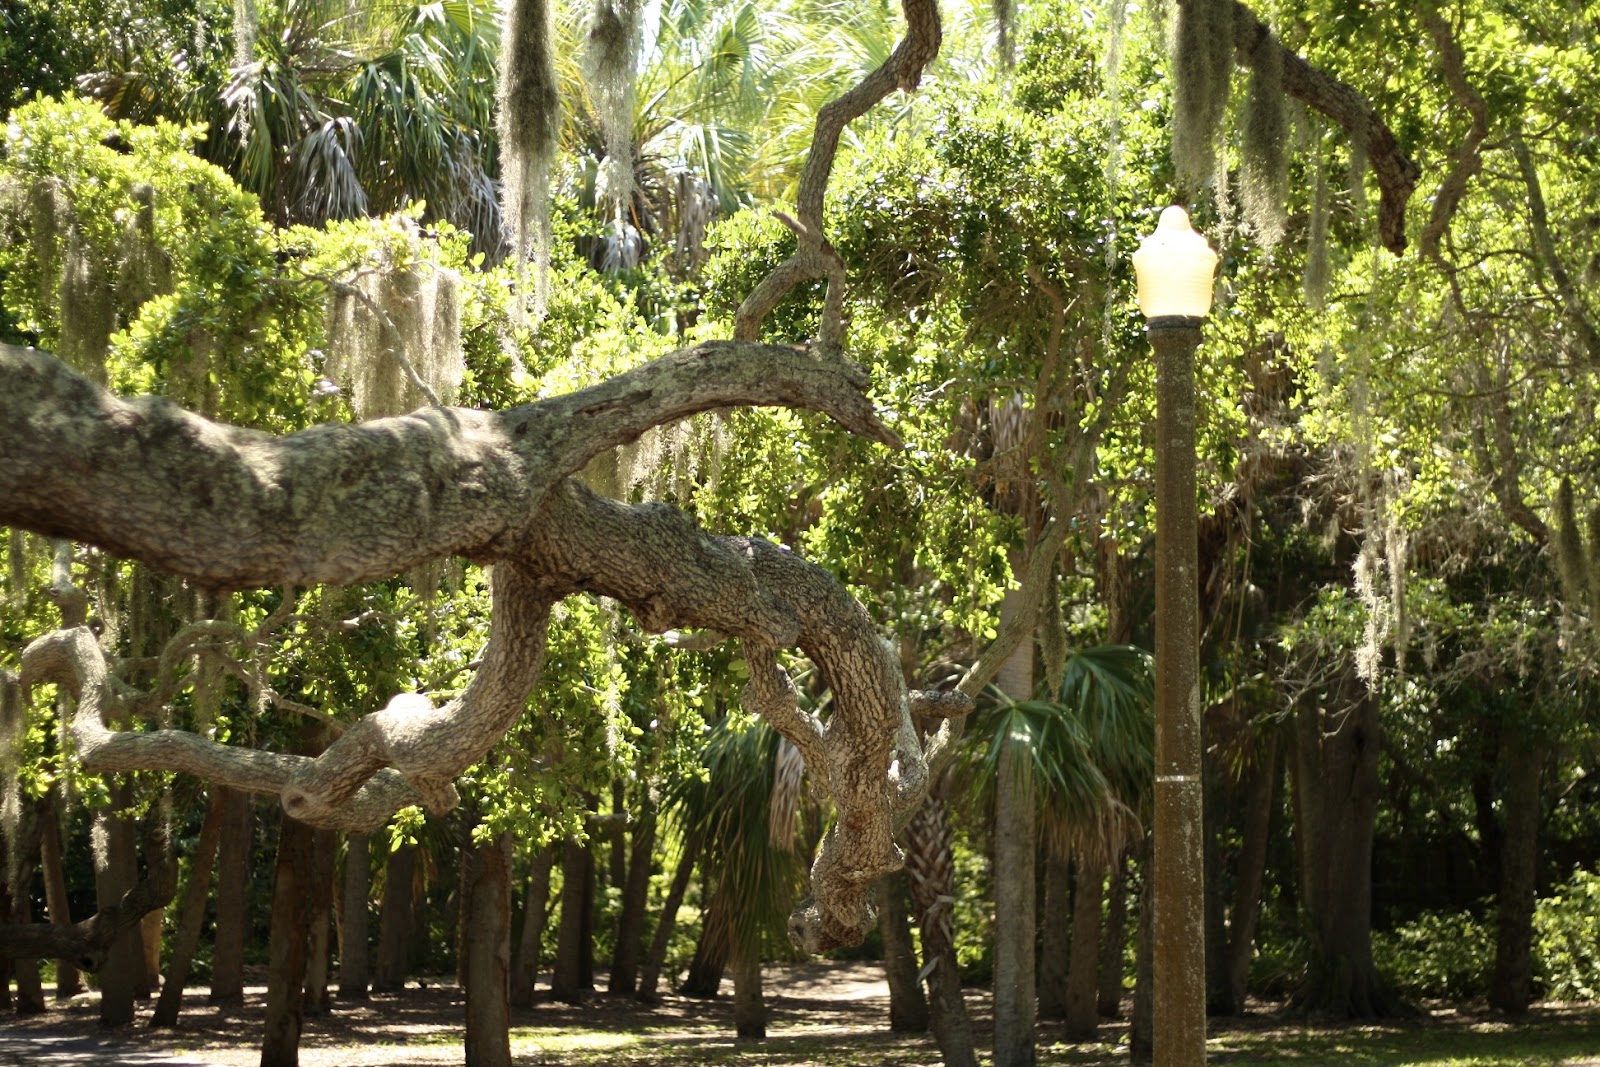 Things To Do In St. Petersburg: Abercrombie Park